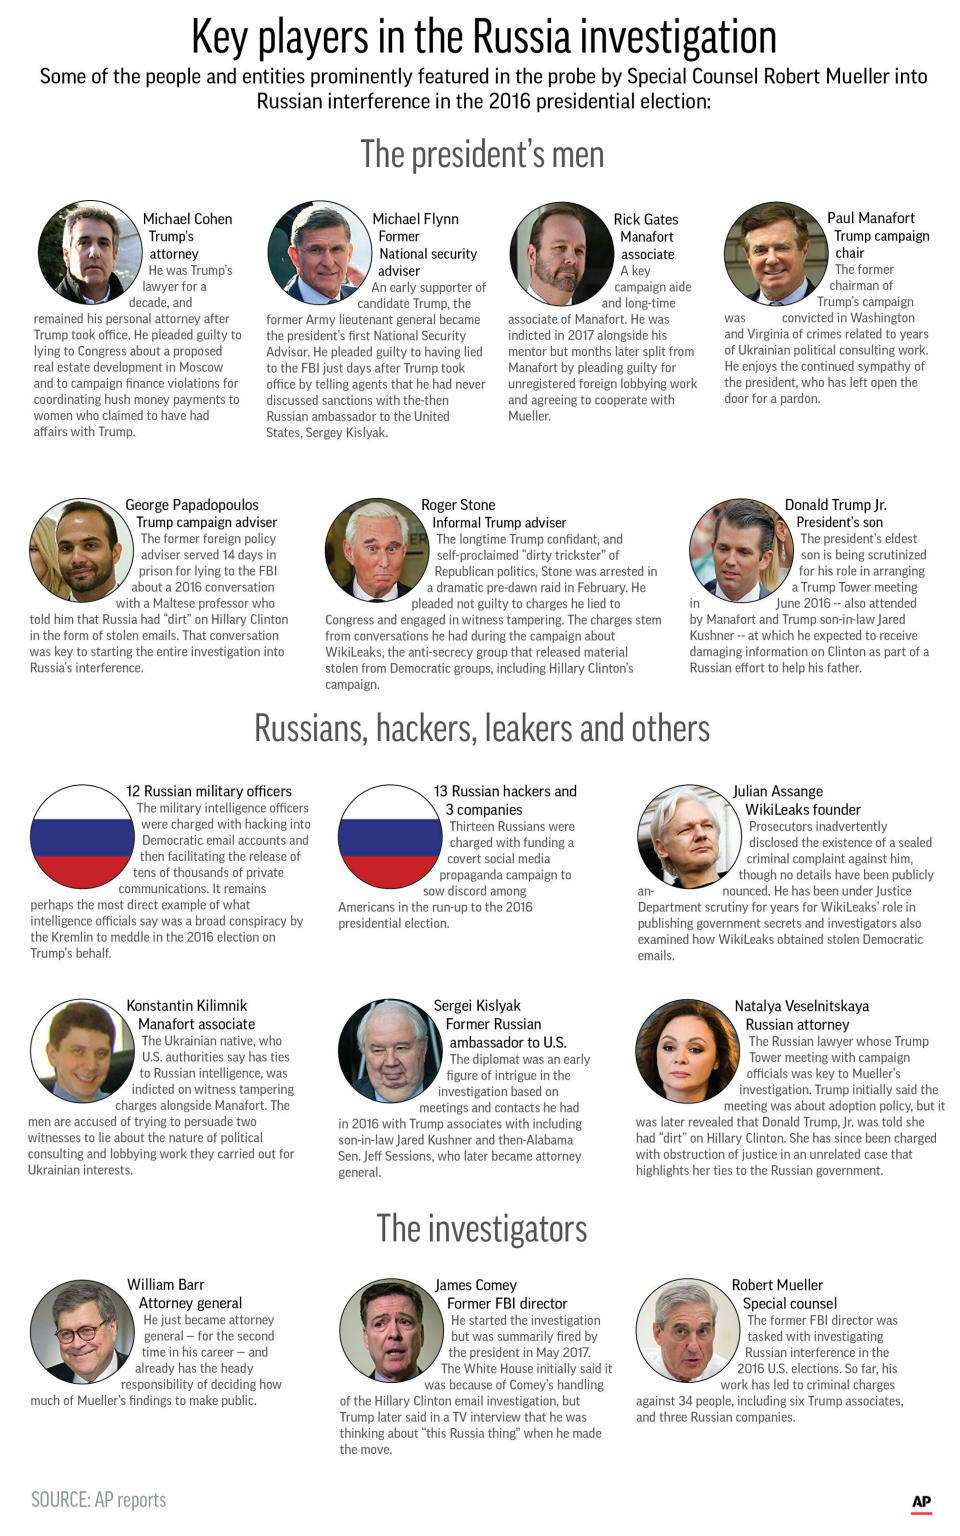 Graphic shows prominent players in the special counsel investigation into Russian meddling in the 2016 election;